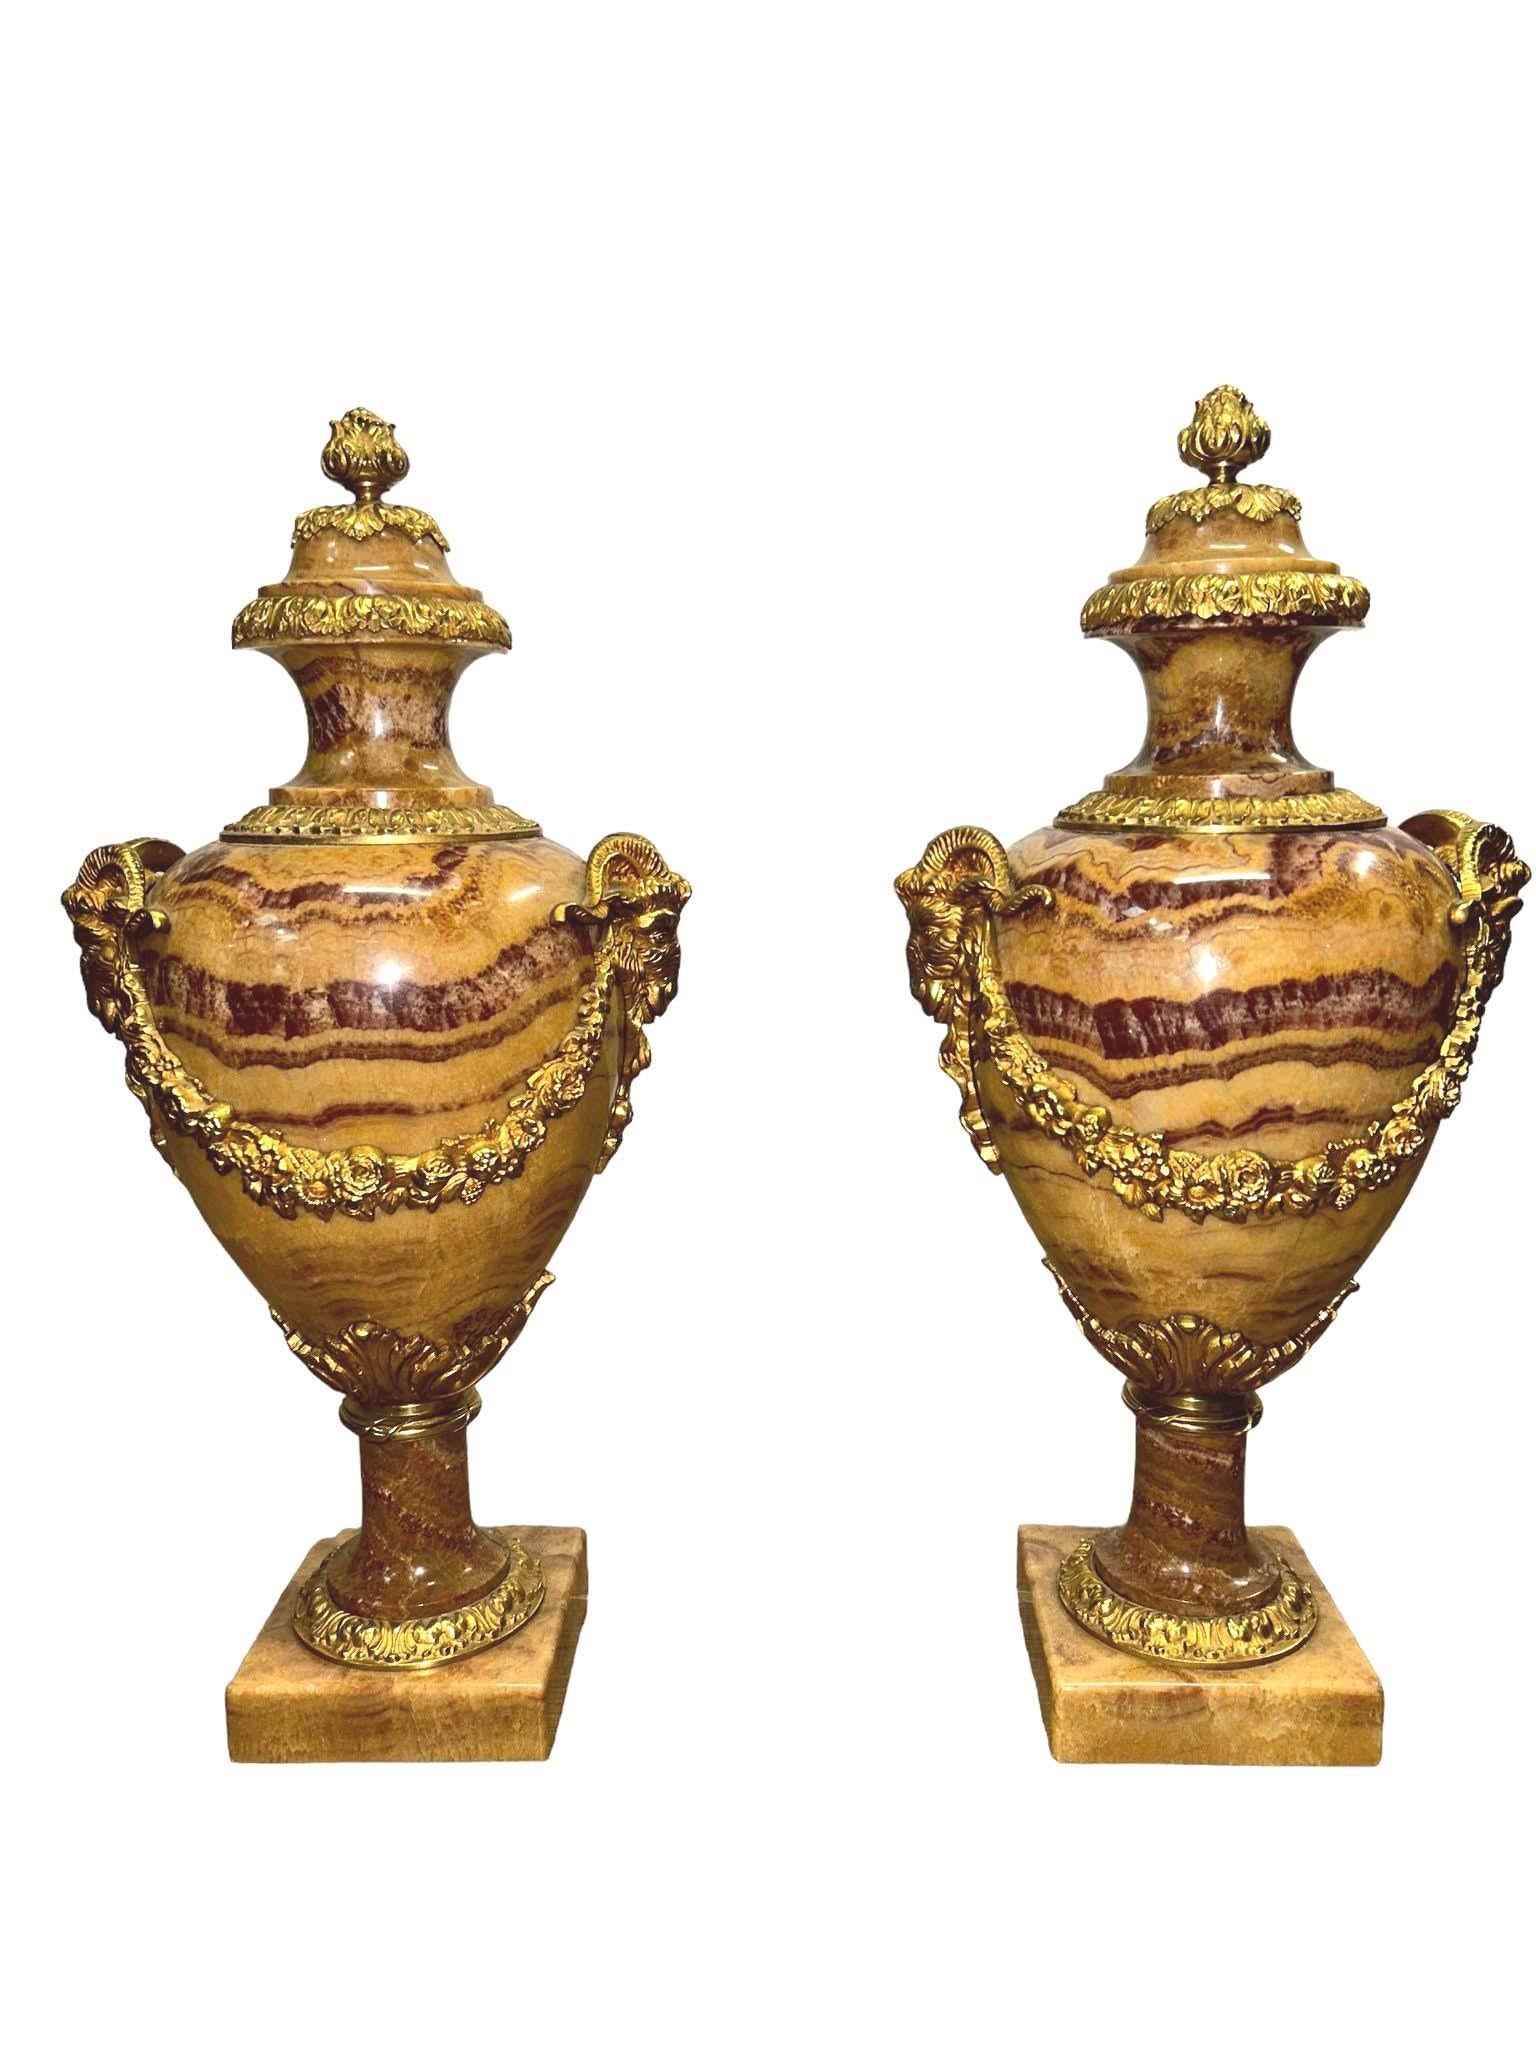 Classic pair of antique French cassolettes of amphora form These are solid marble so very heavy
Original gilt fixtures with rams head handles, encrusted floral sash, acanthus leaves and a pineapple finial
These would lift any interior
Bought from a